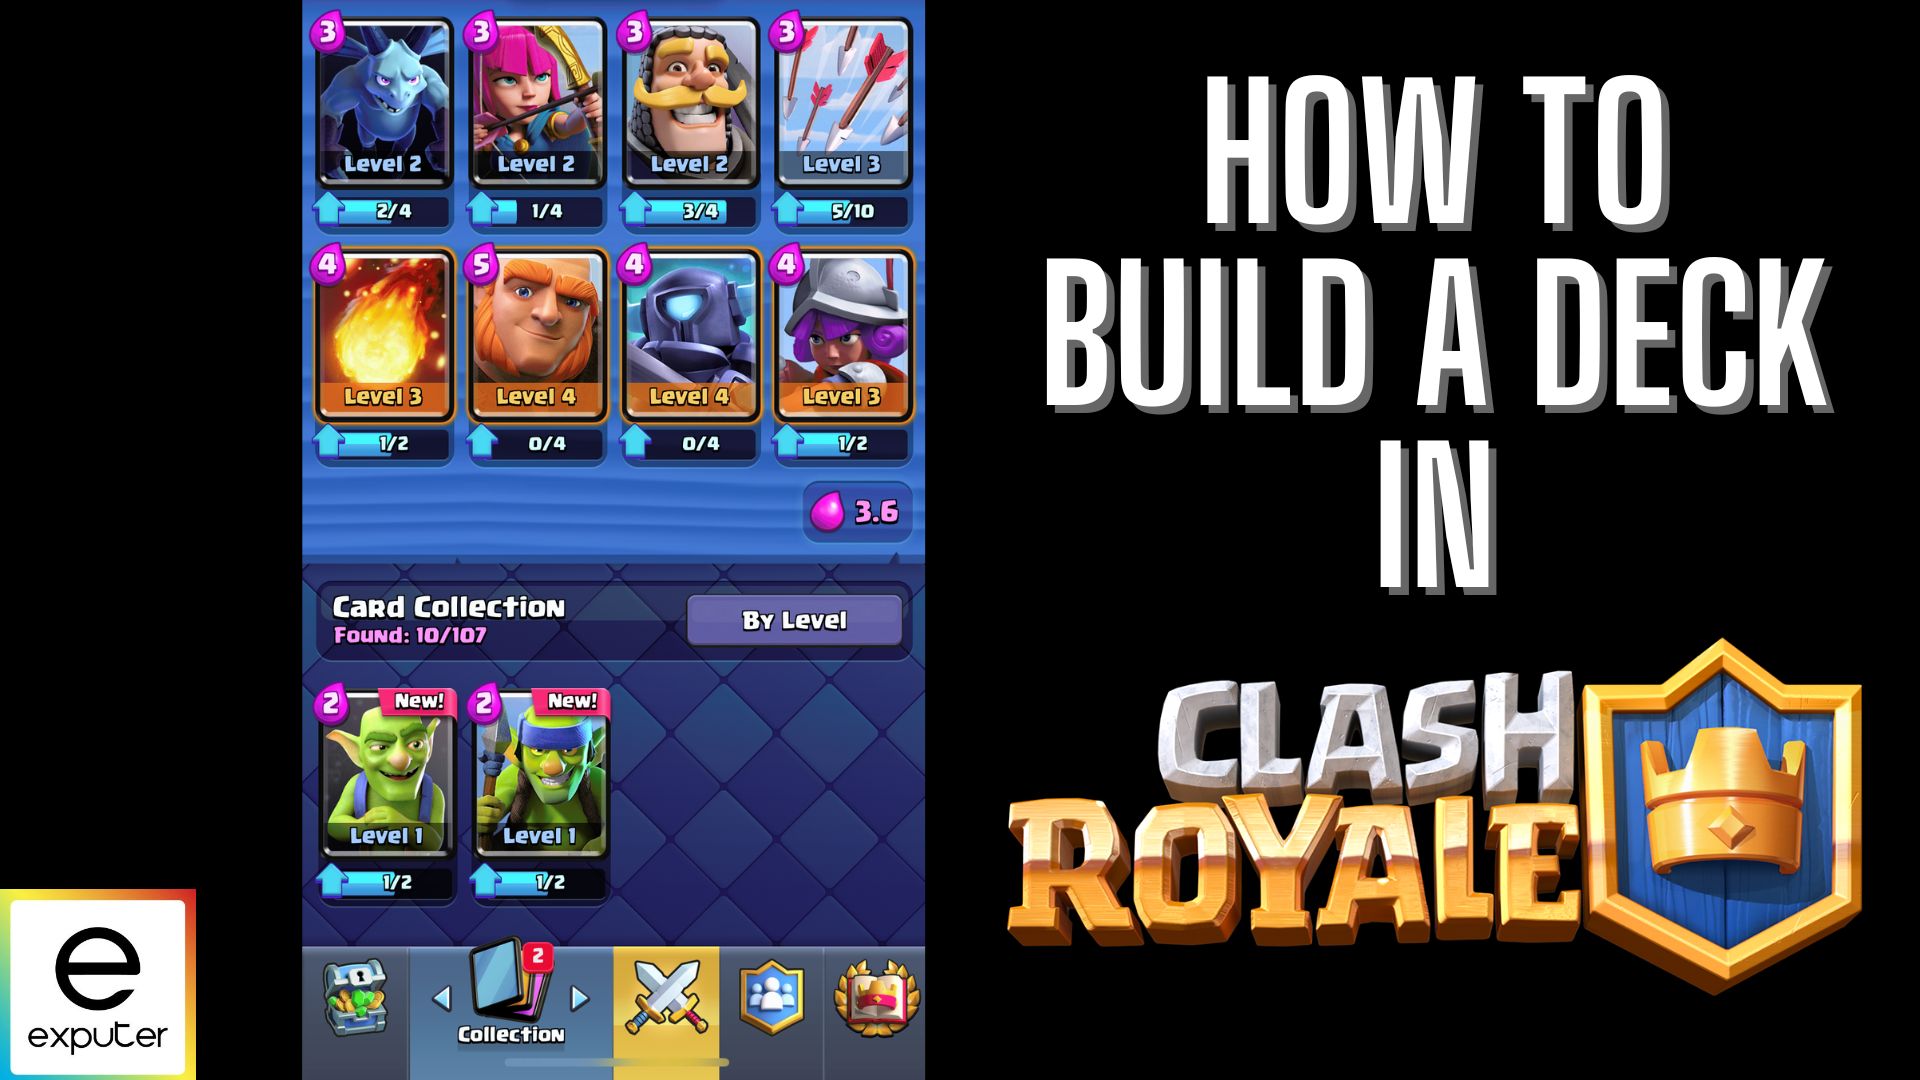 Cheapest deck in clash royale